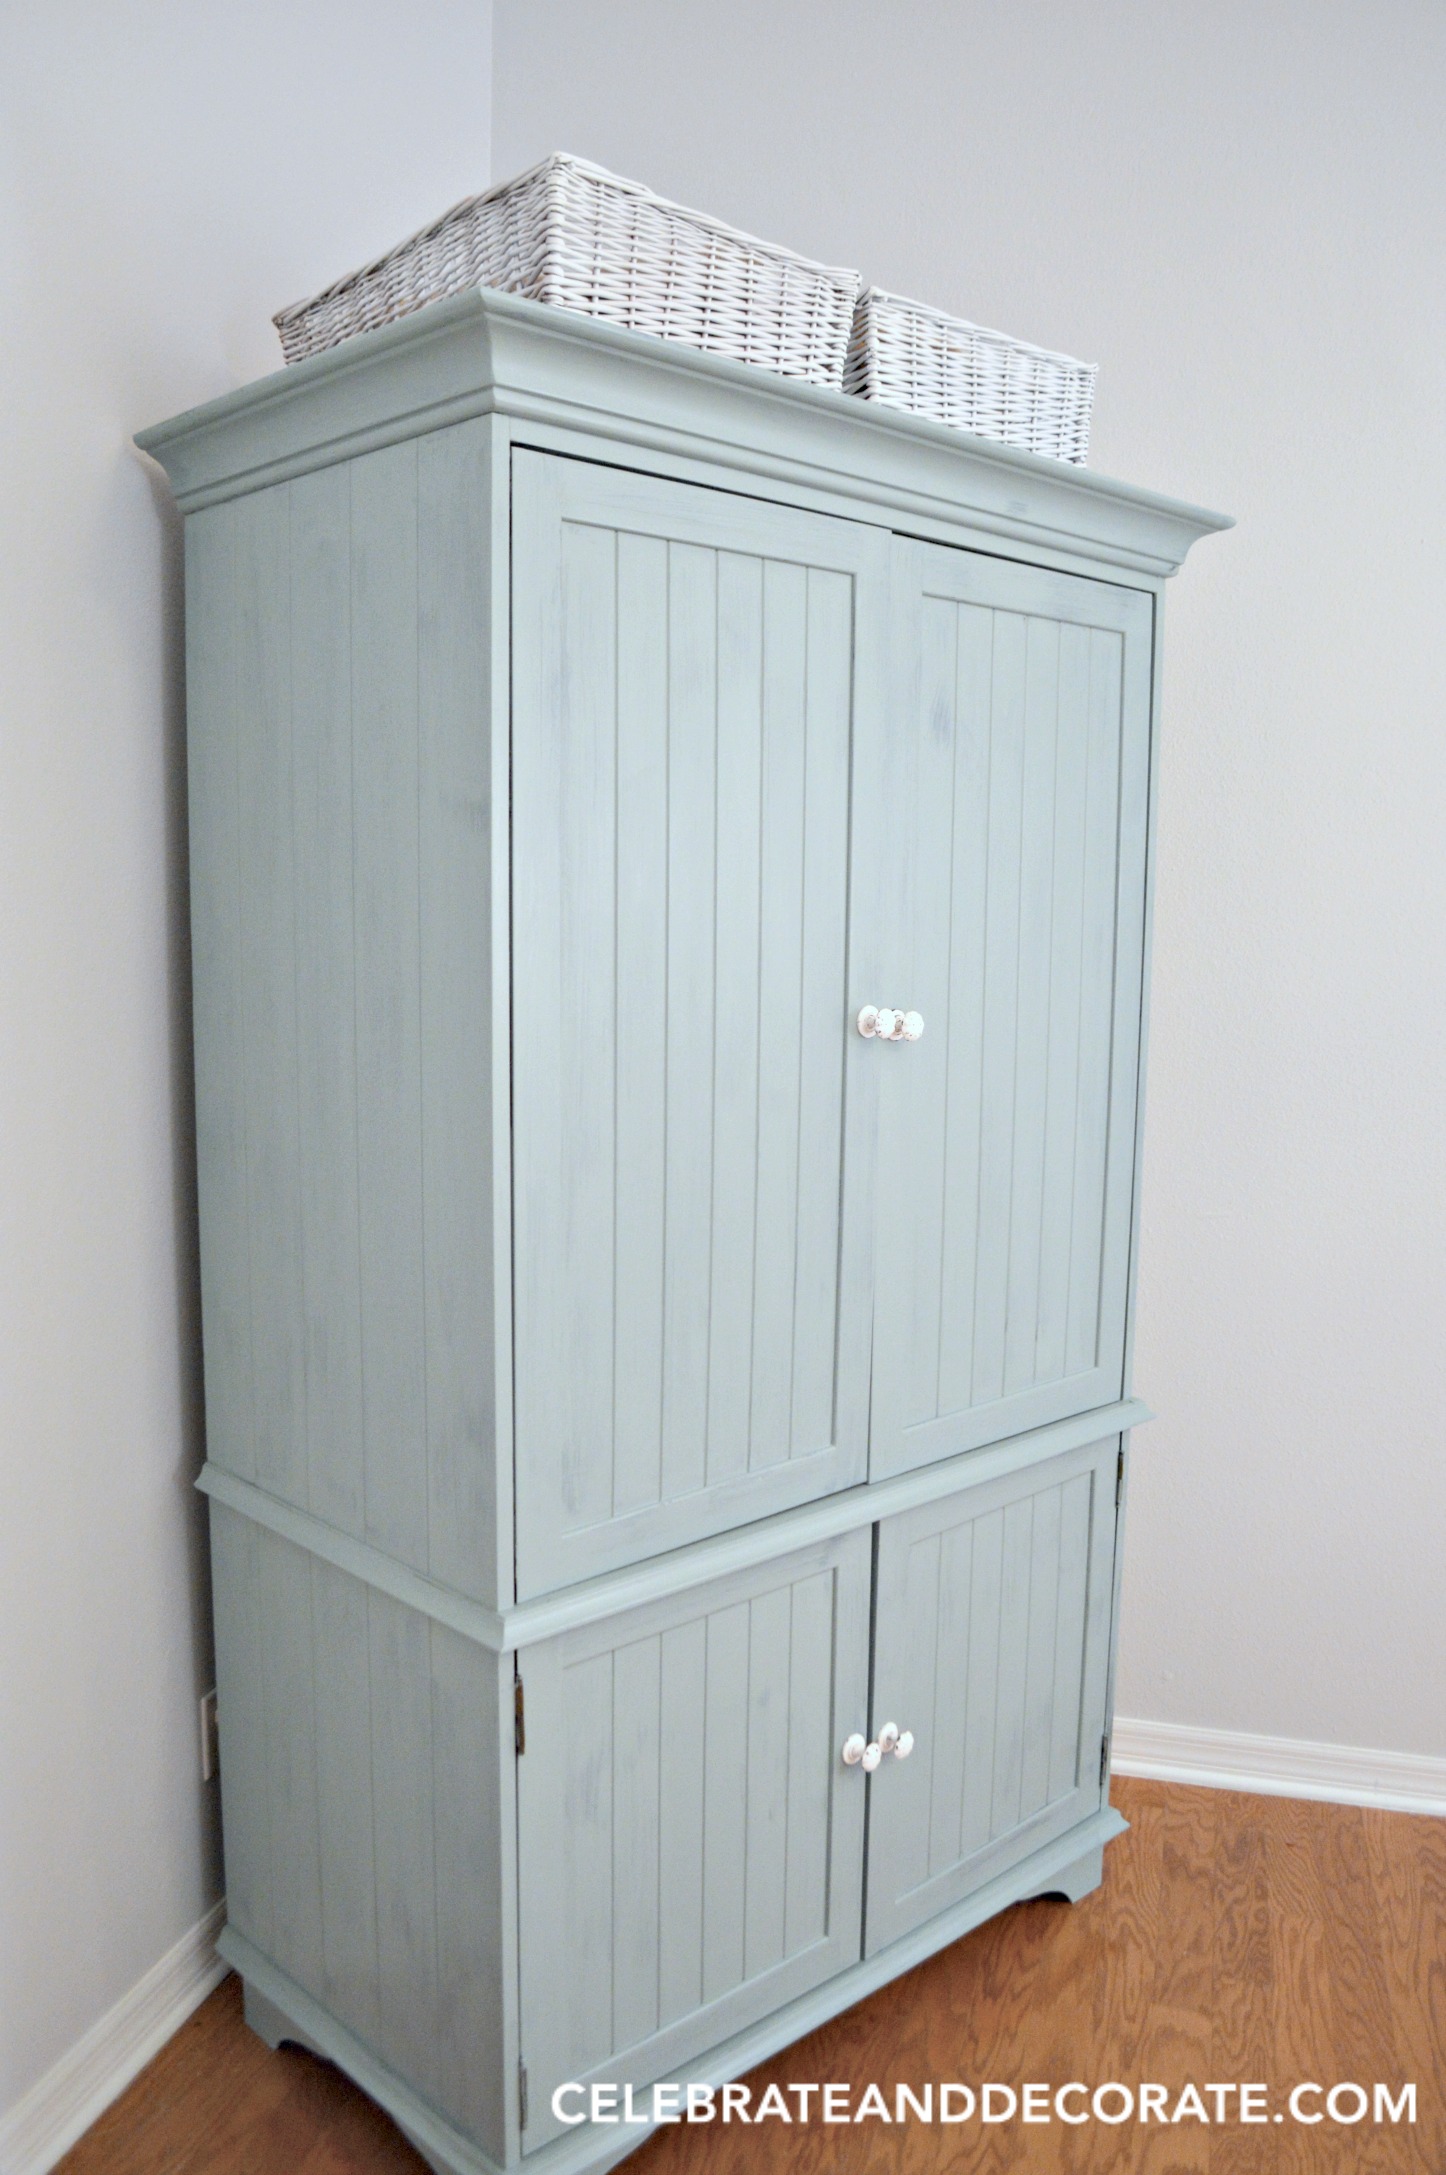 Old Fashioned Milk Paint Is Perfect For Transforming The Pieces You Love